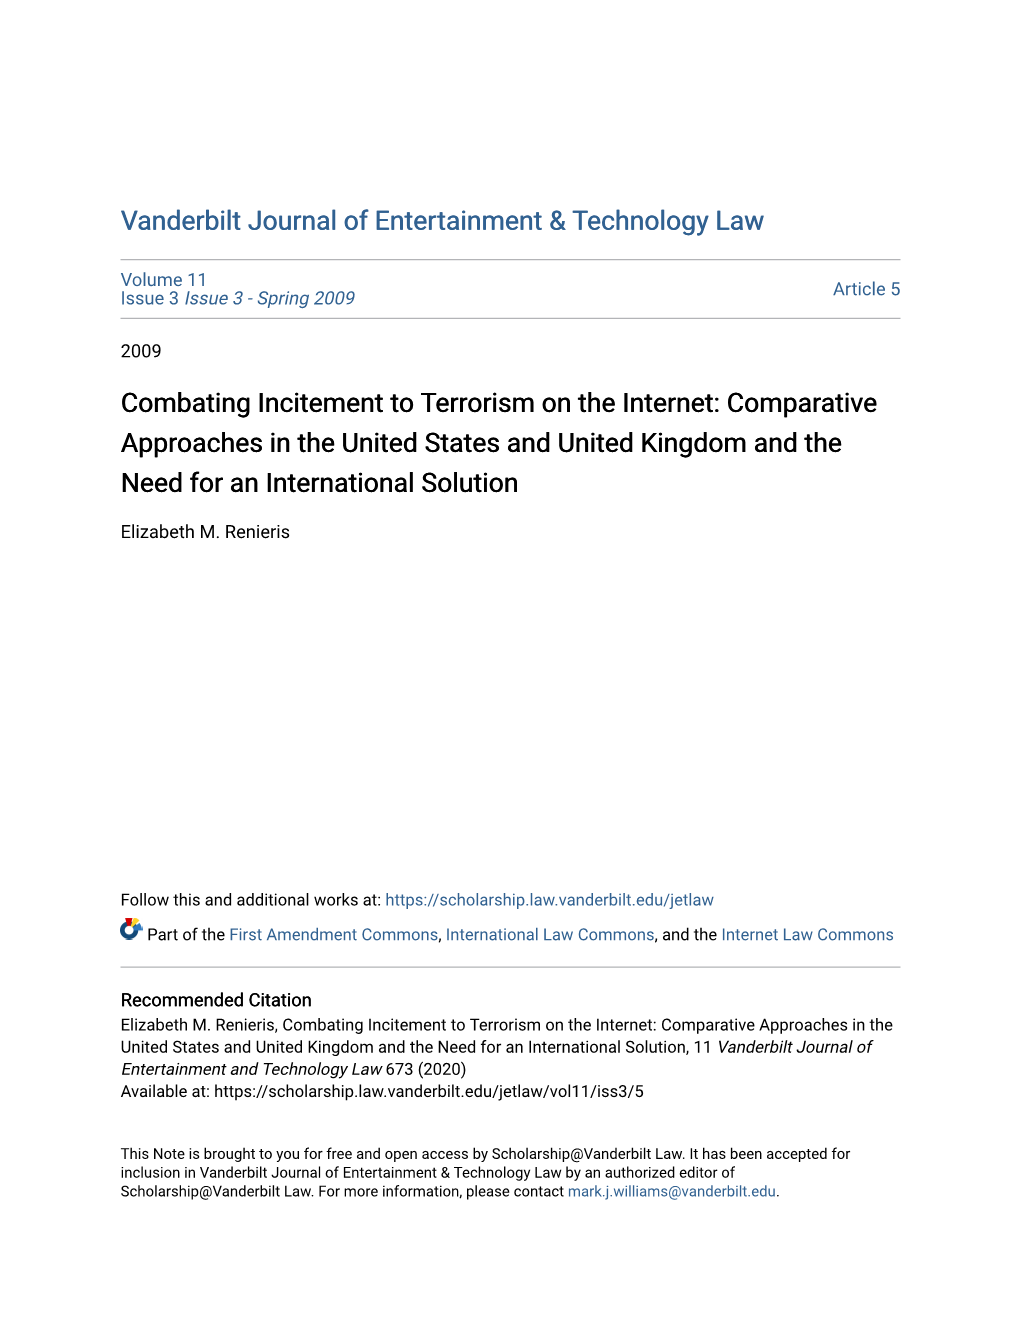 Combating Incitement to Terrorism on the Internet: Comparative Approaches in the United States and United Kingdom and the Need for an International Solution